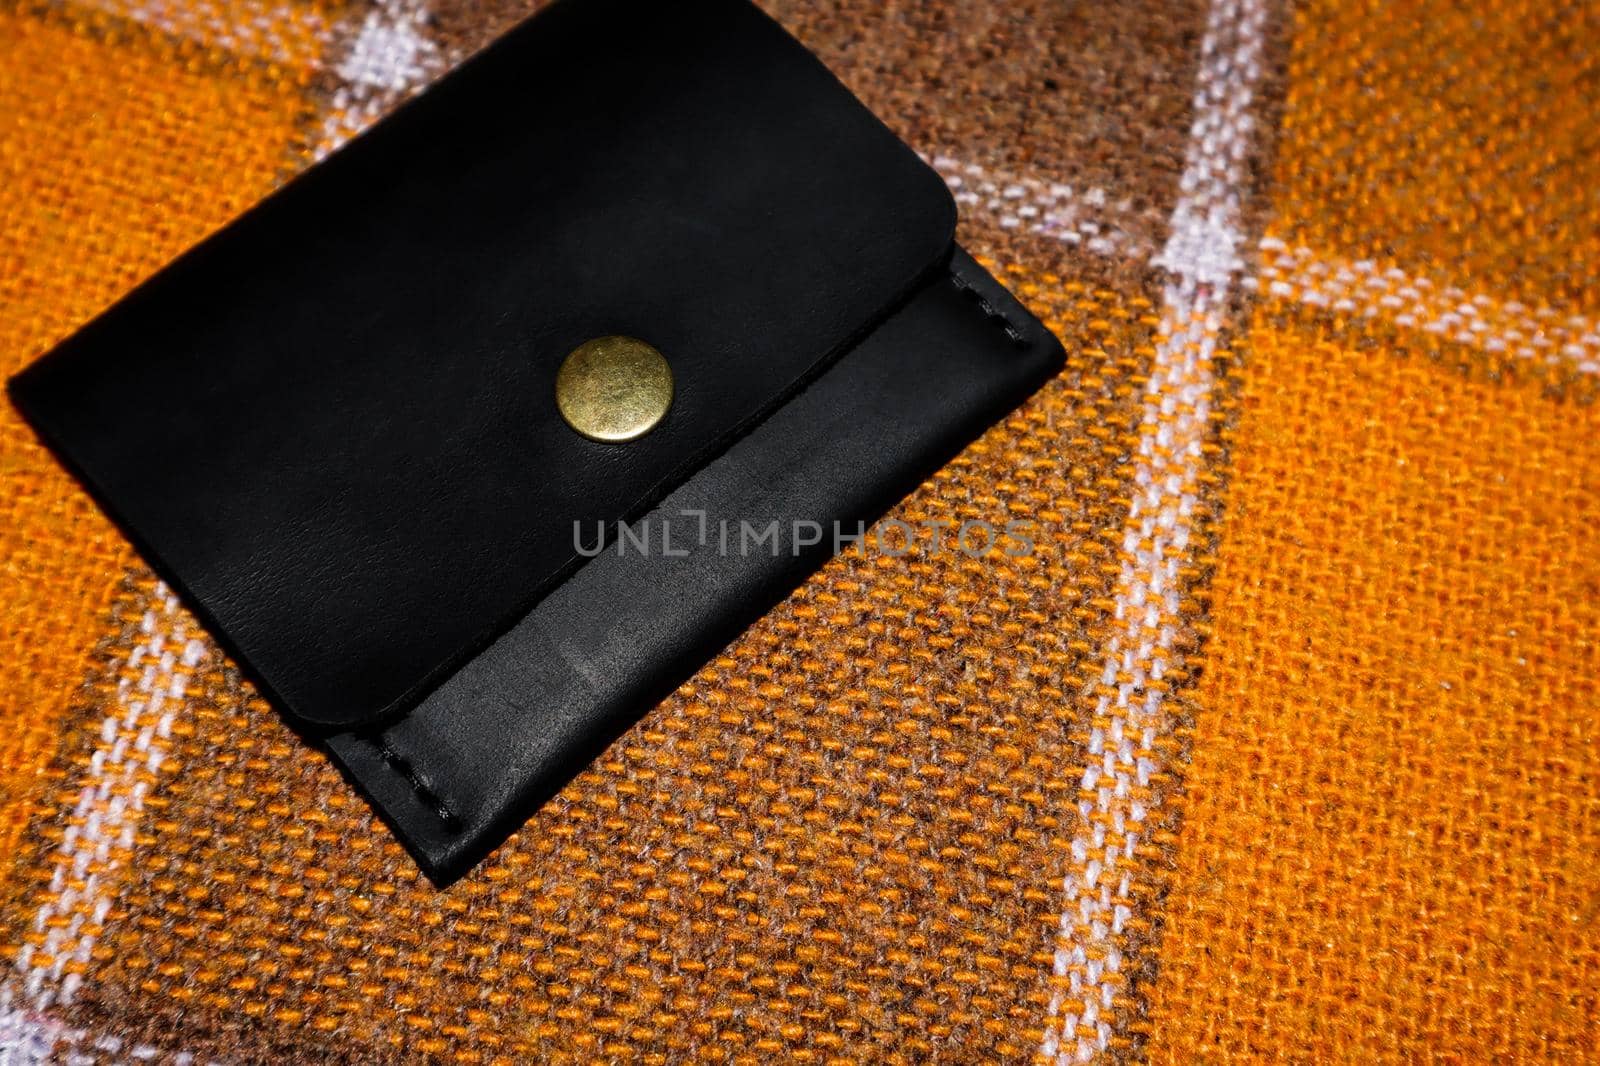 The leather wallet is sewn with white threads on an orange cover in a cell